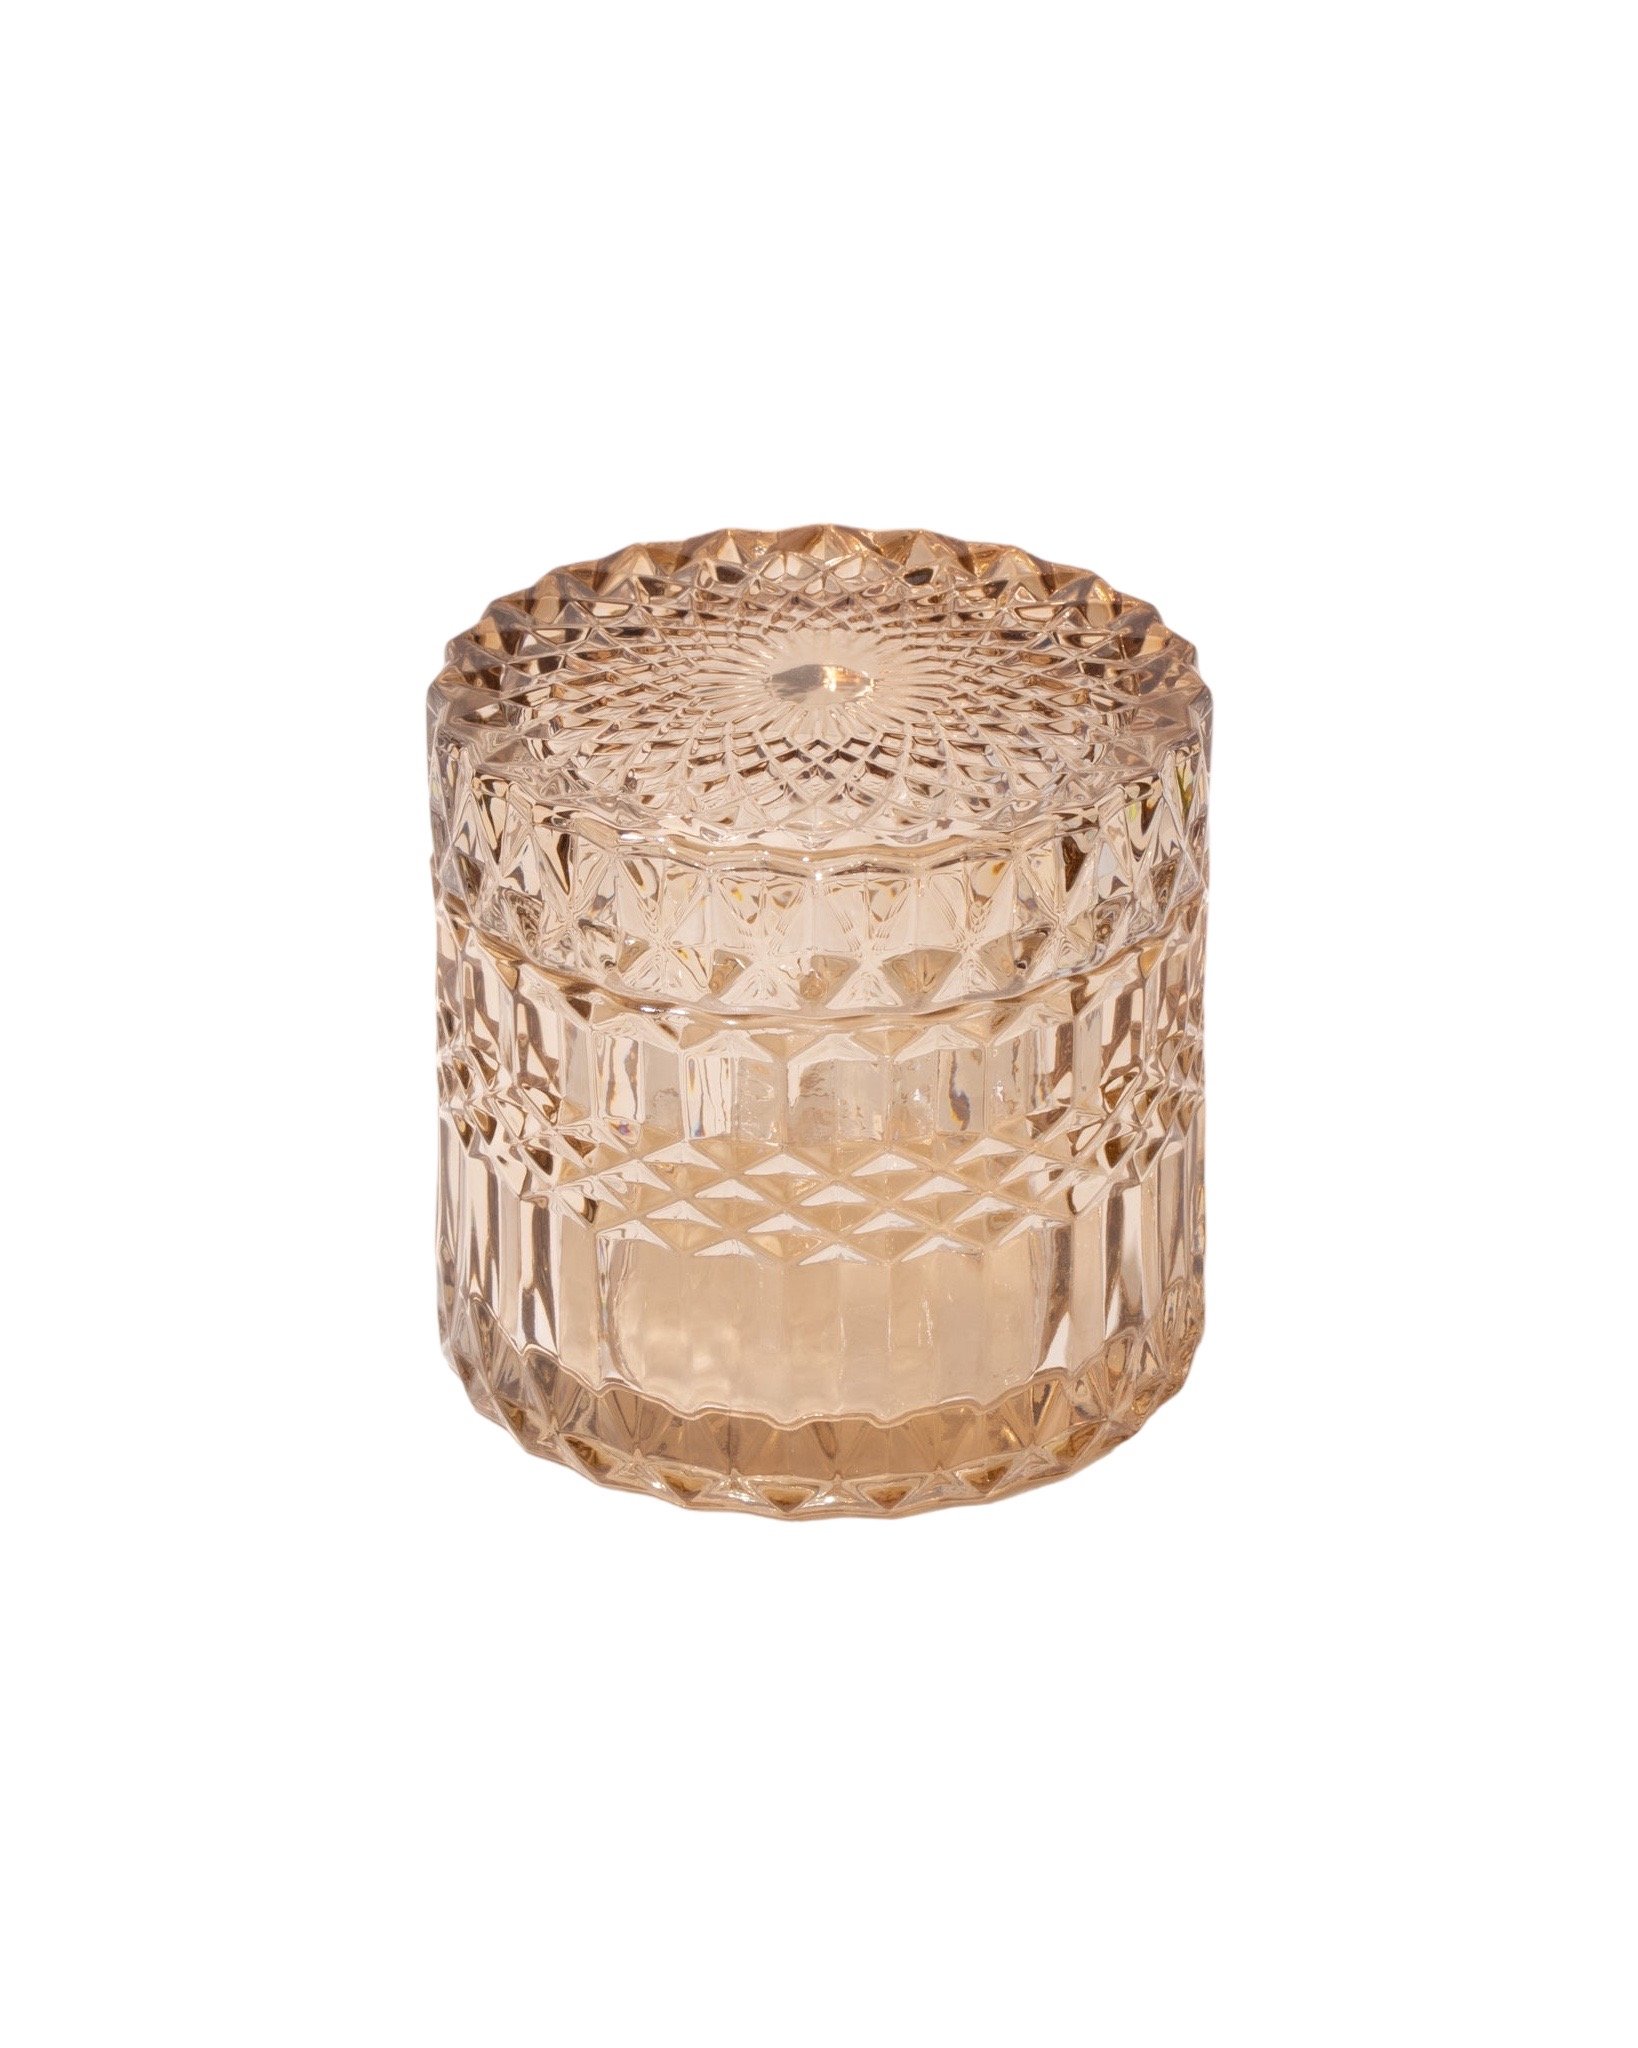 $45, champagne crystal